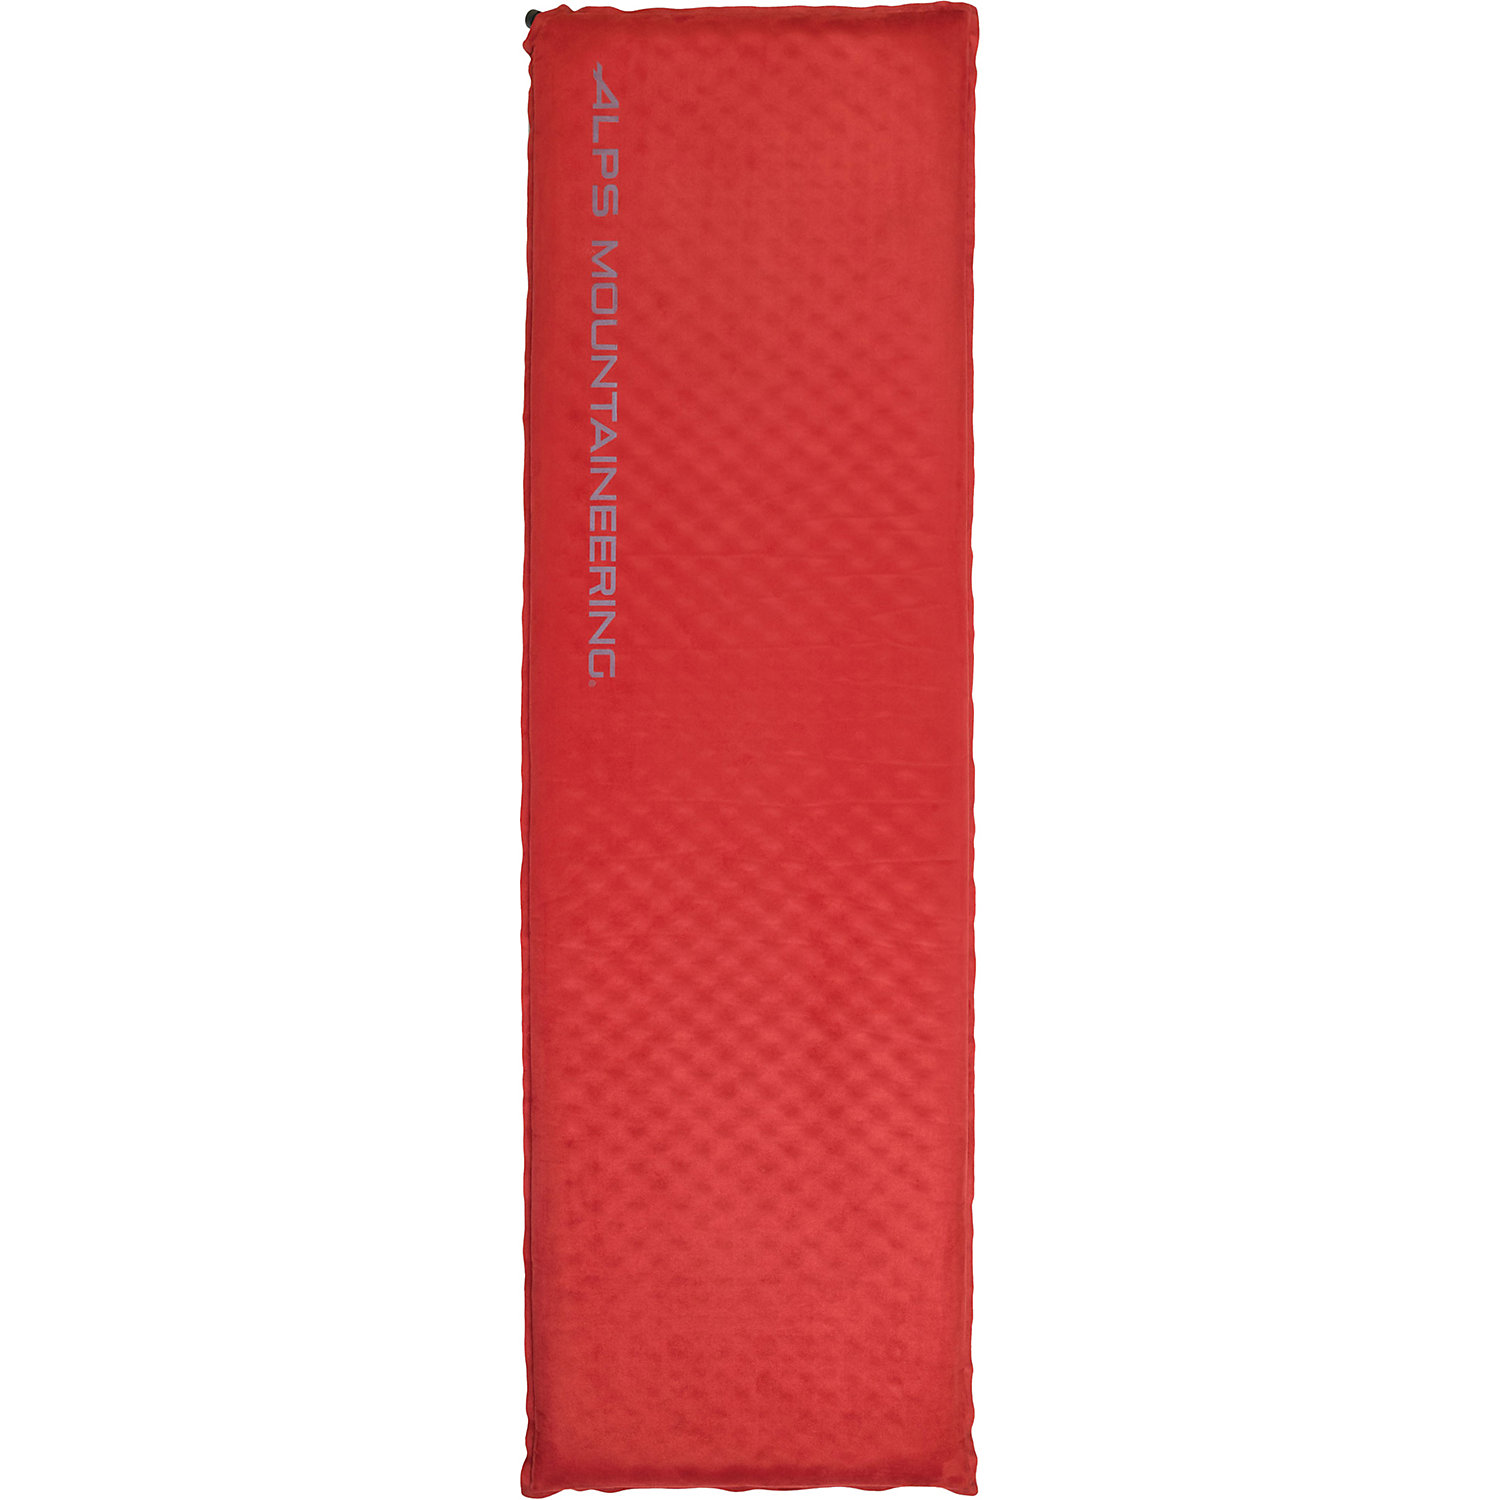 ALPS Mountaineering Apex Air Pad Long